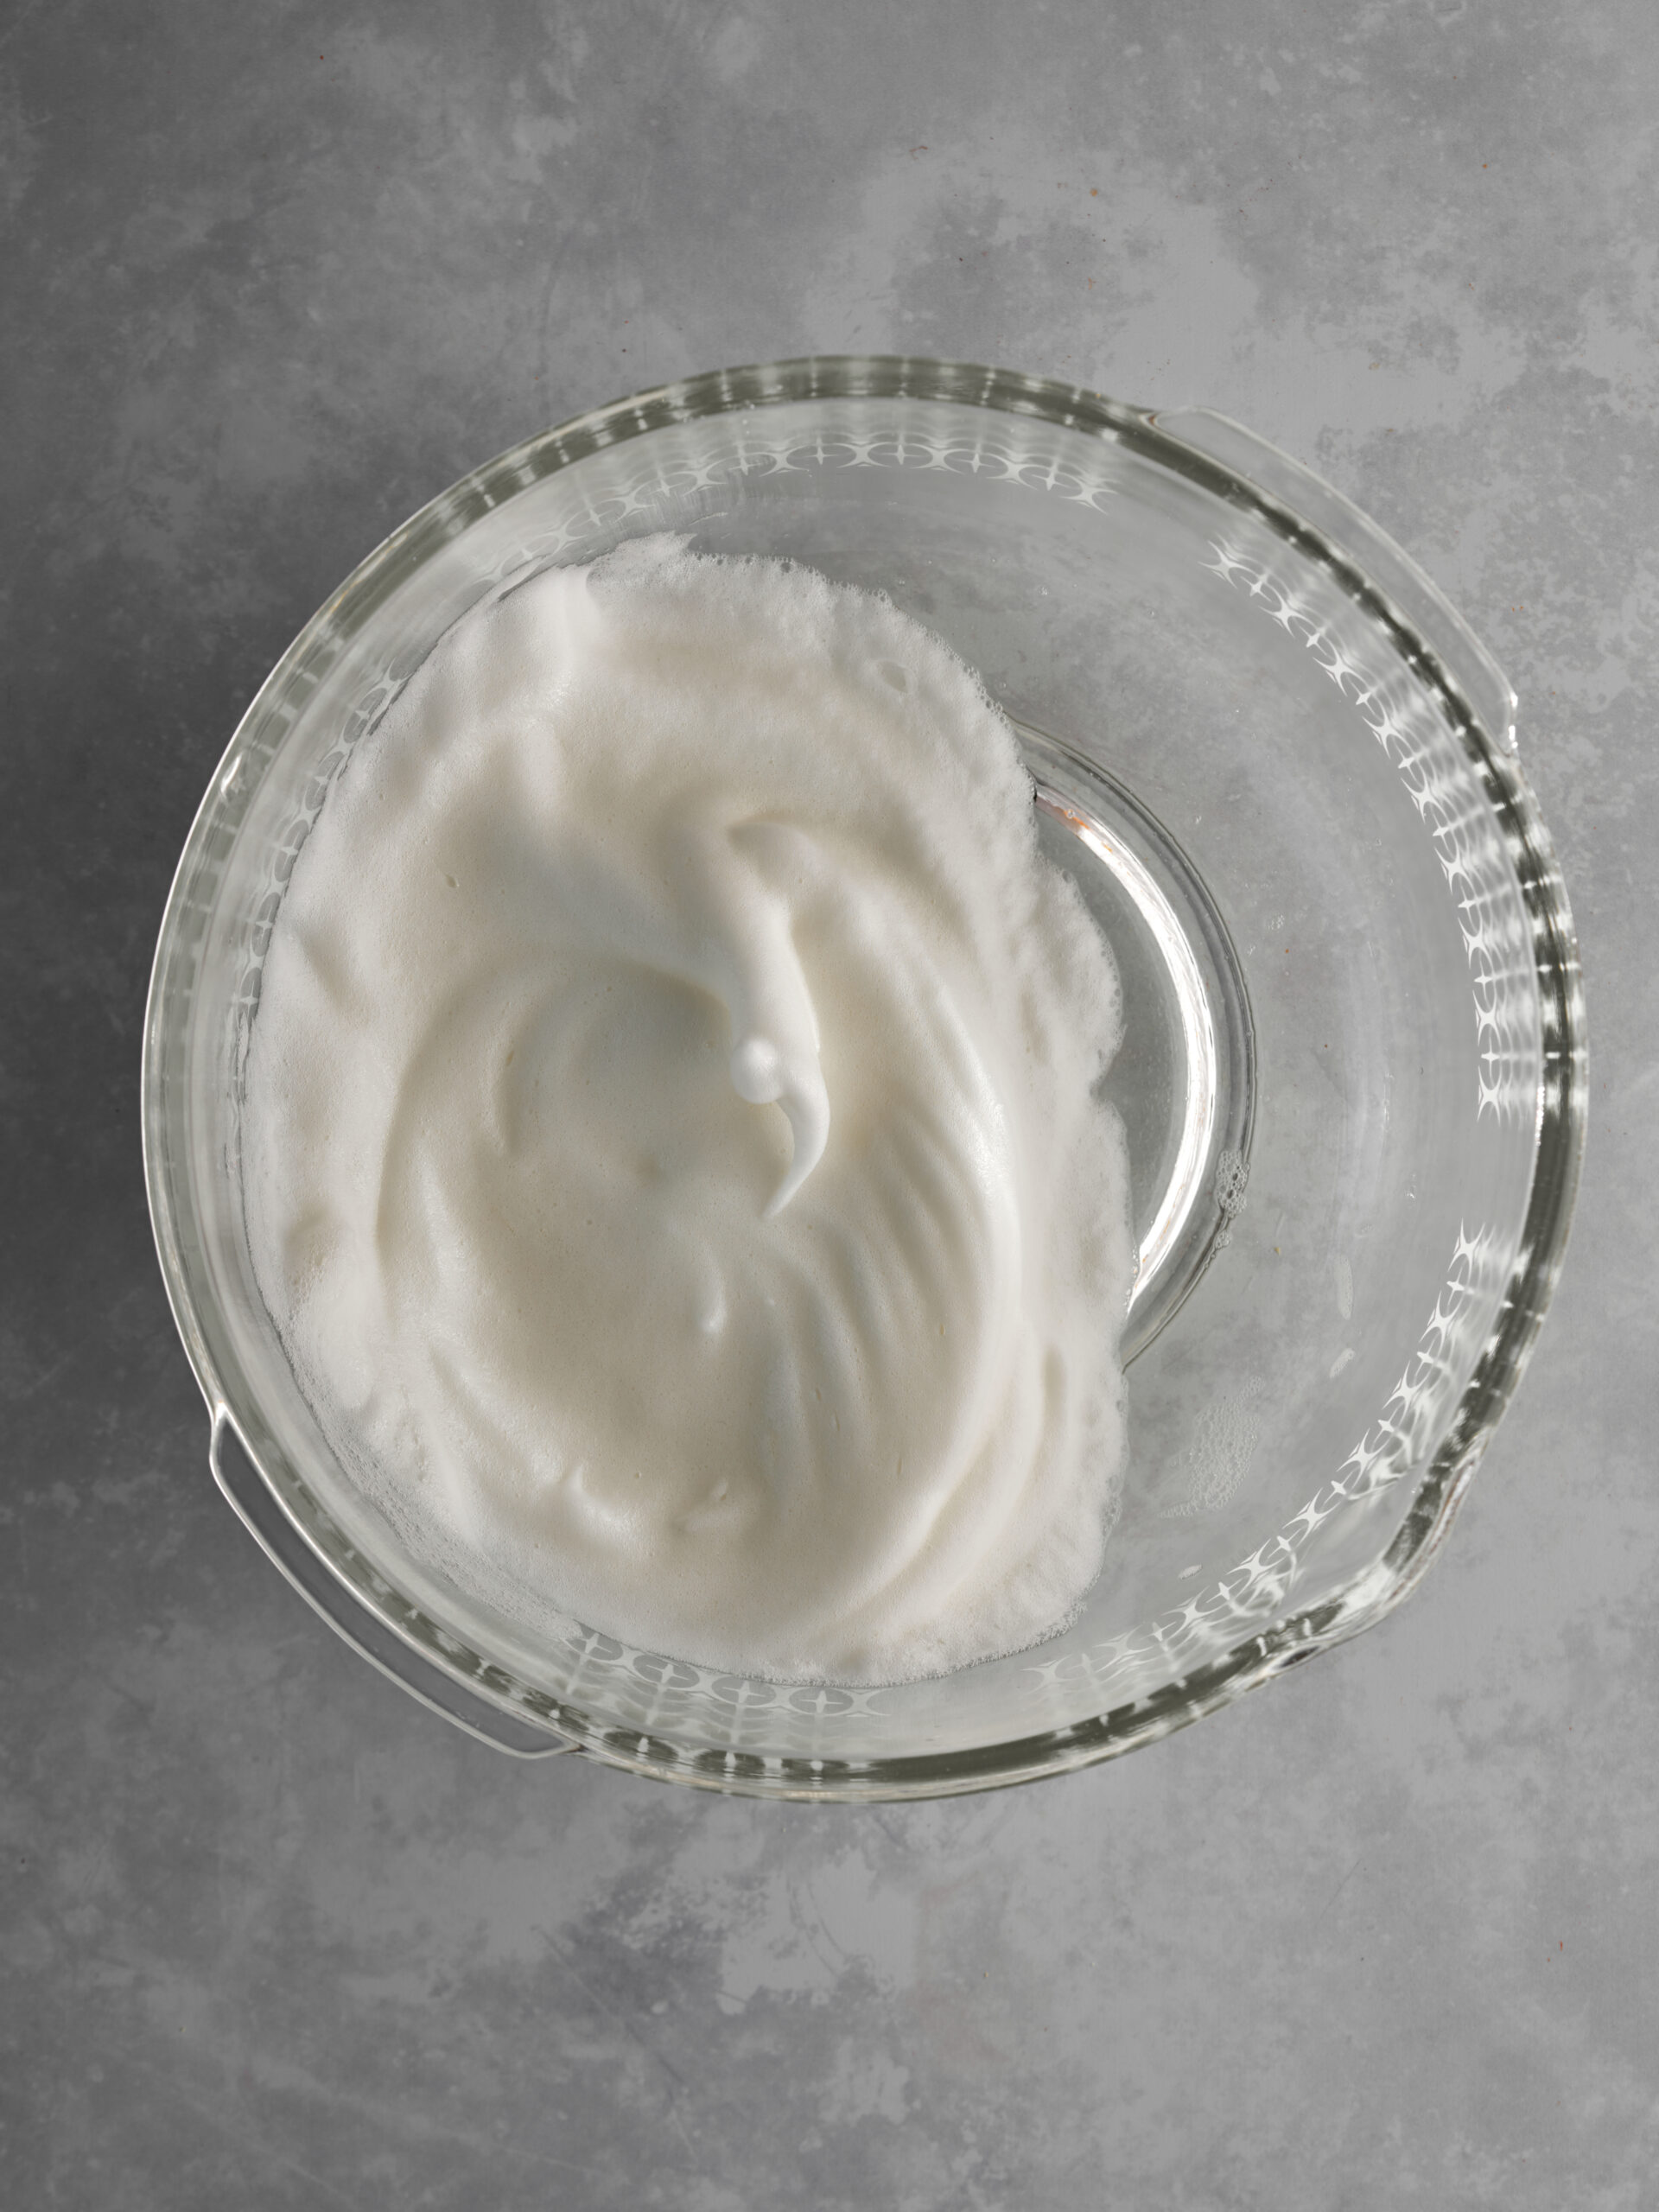 Whipped egg whites in a large glass bowl.